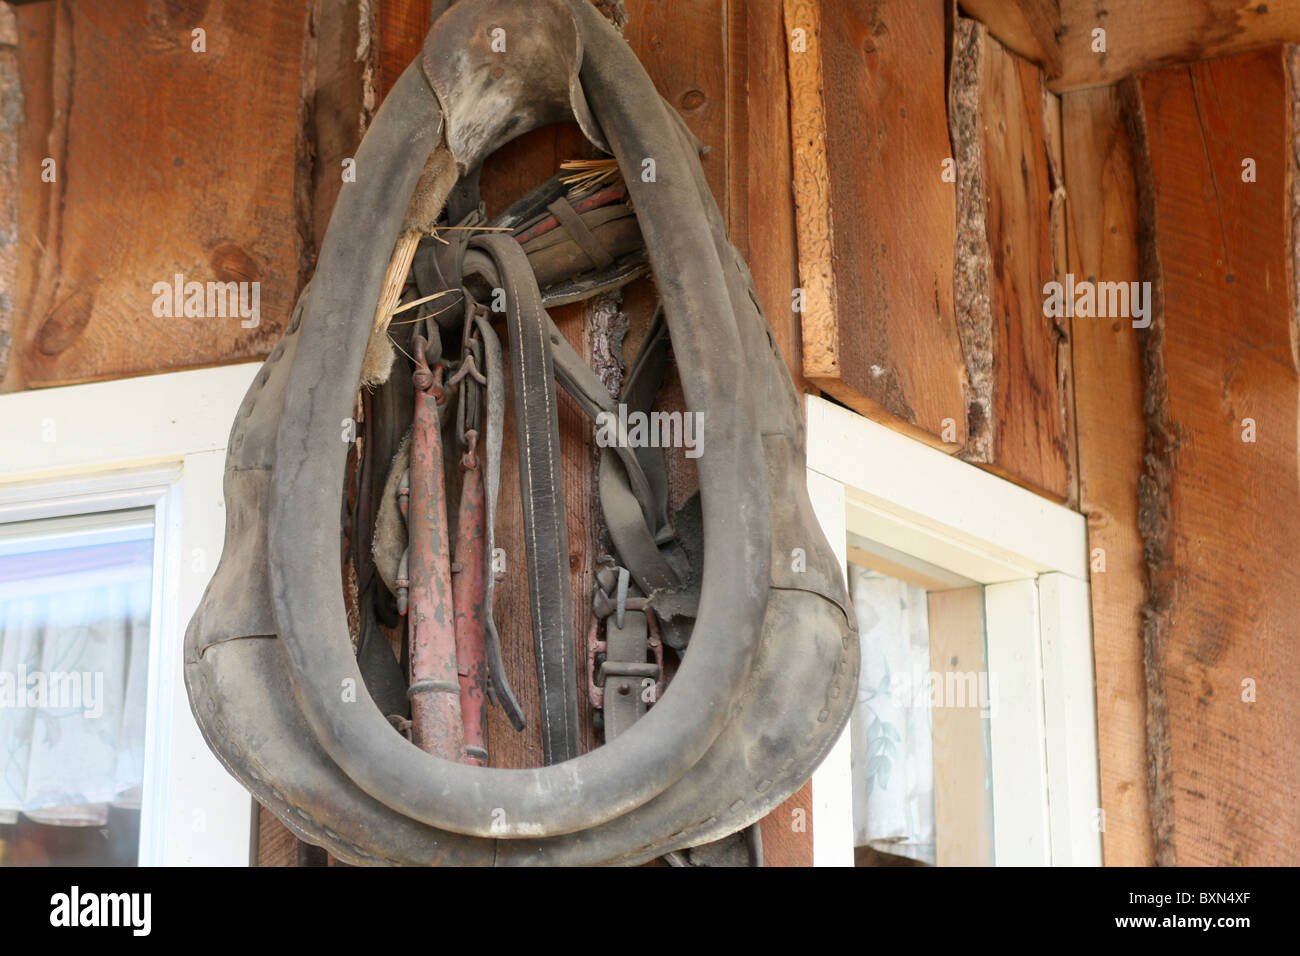 Harness part for a draft horse Stock Photo